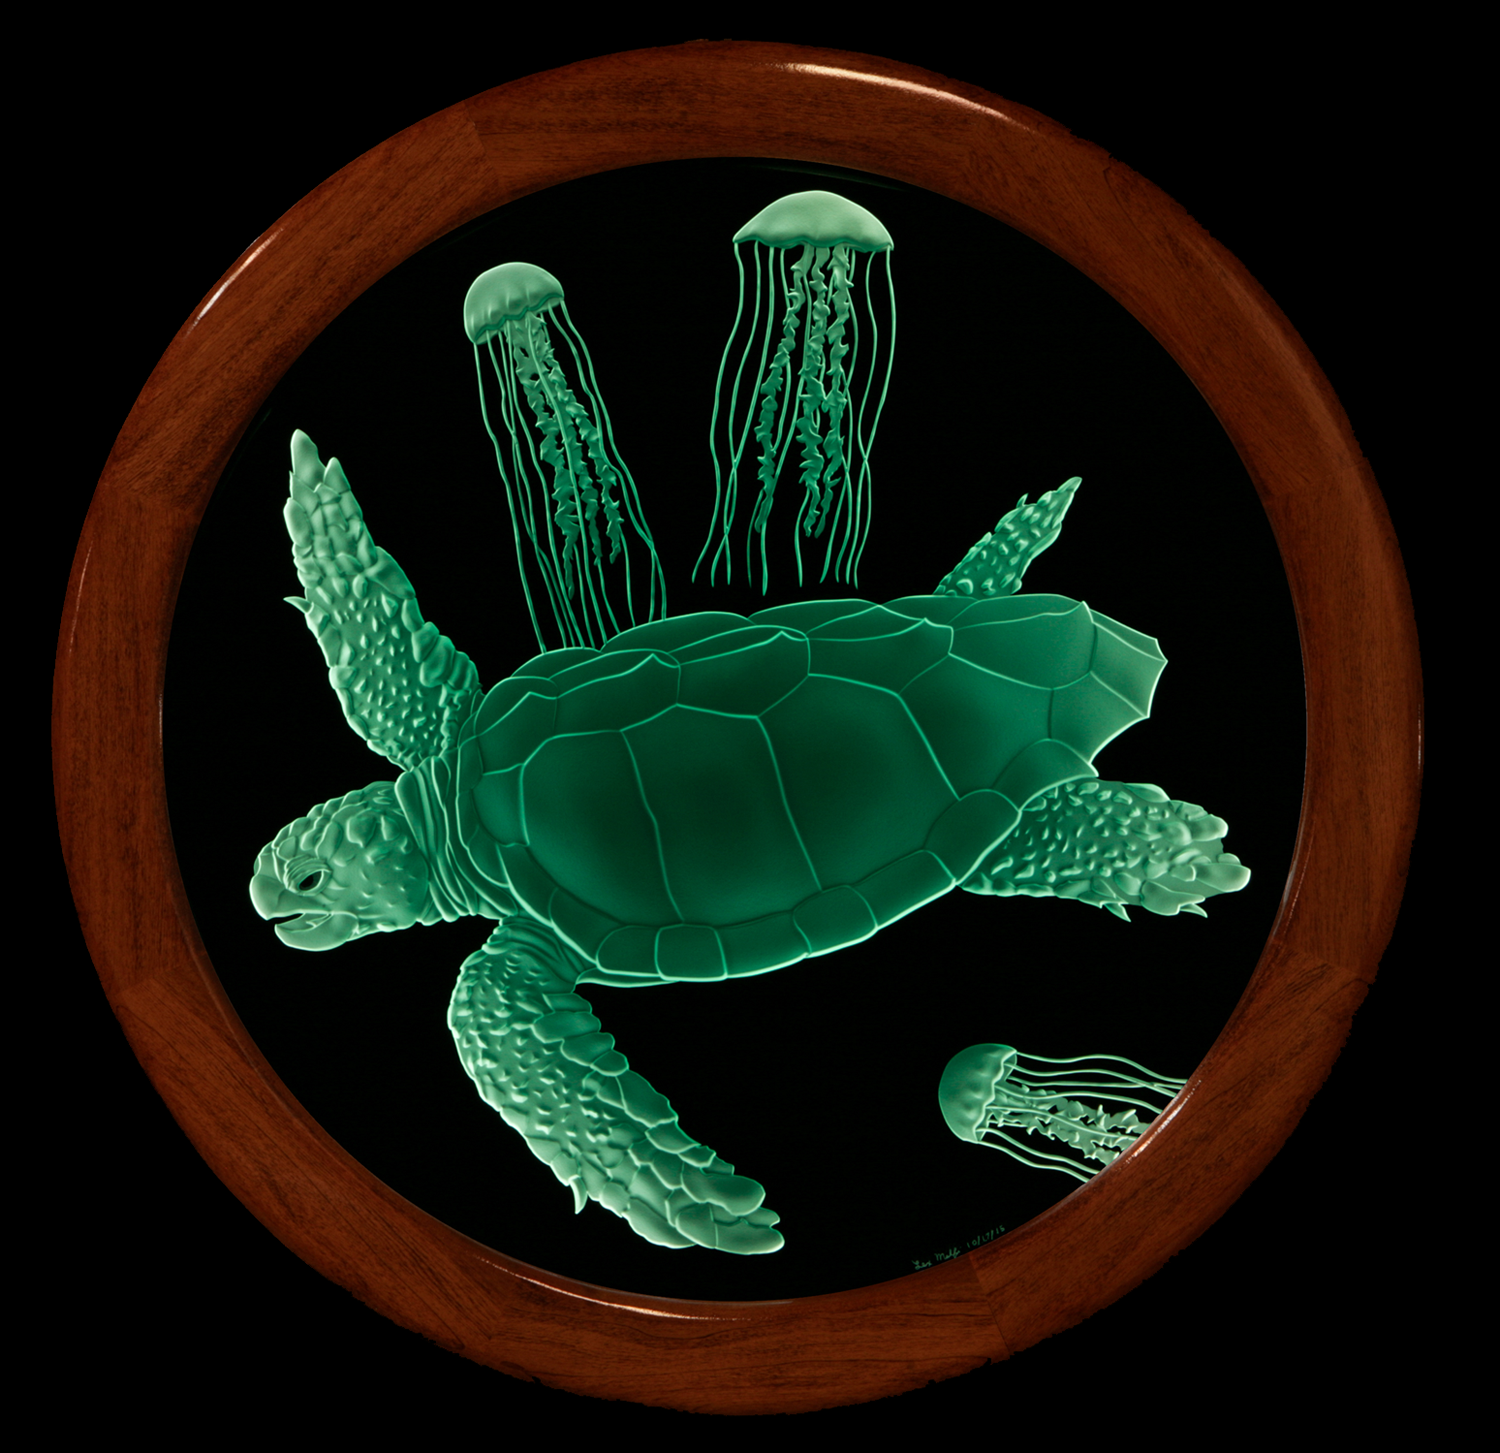 Sand Carved Glass Sea Turtle by Lex Melfi 